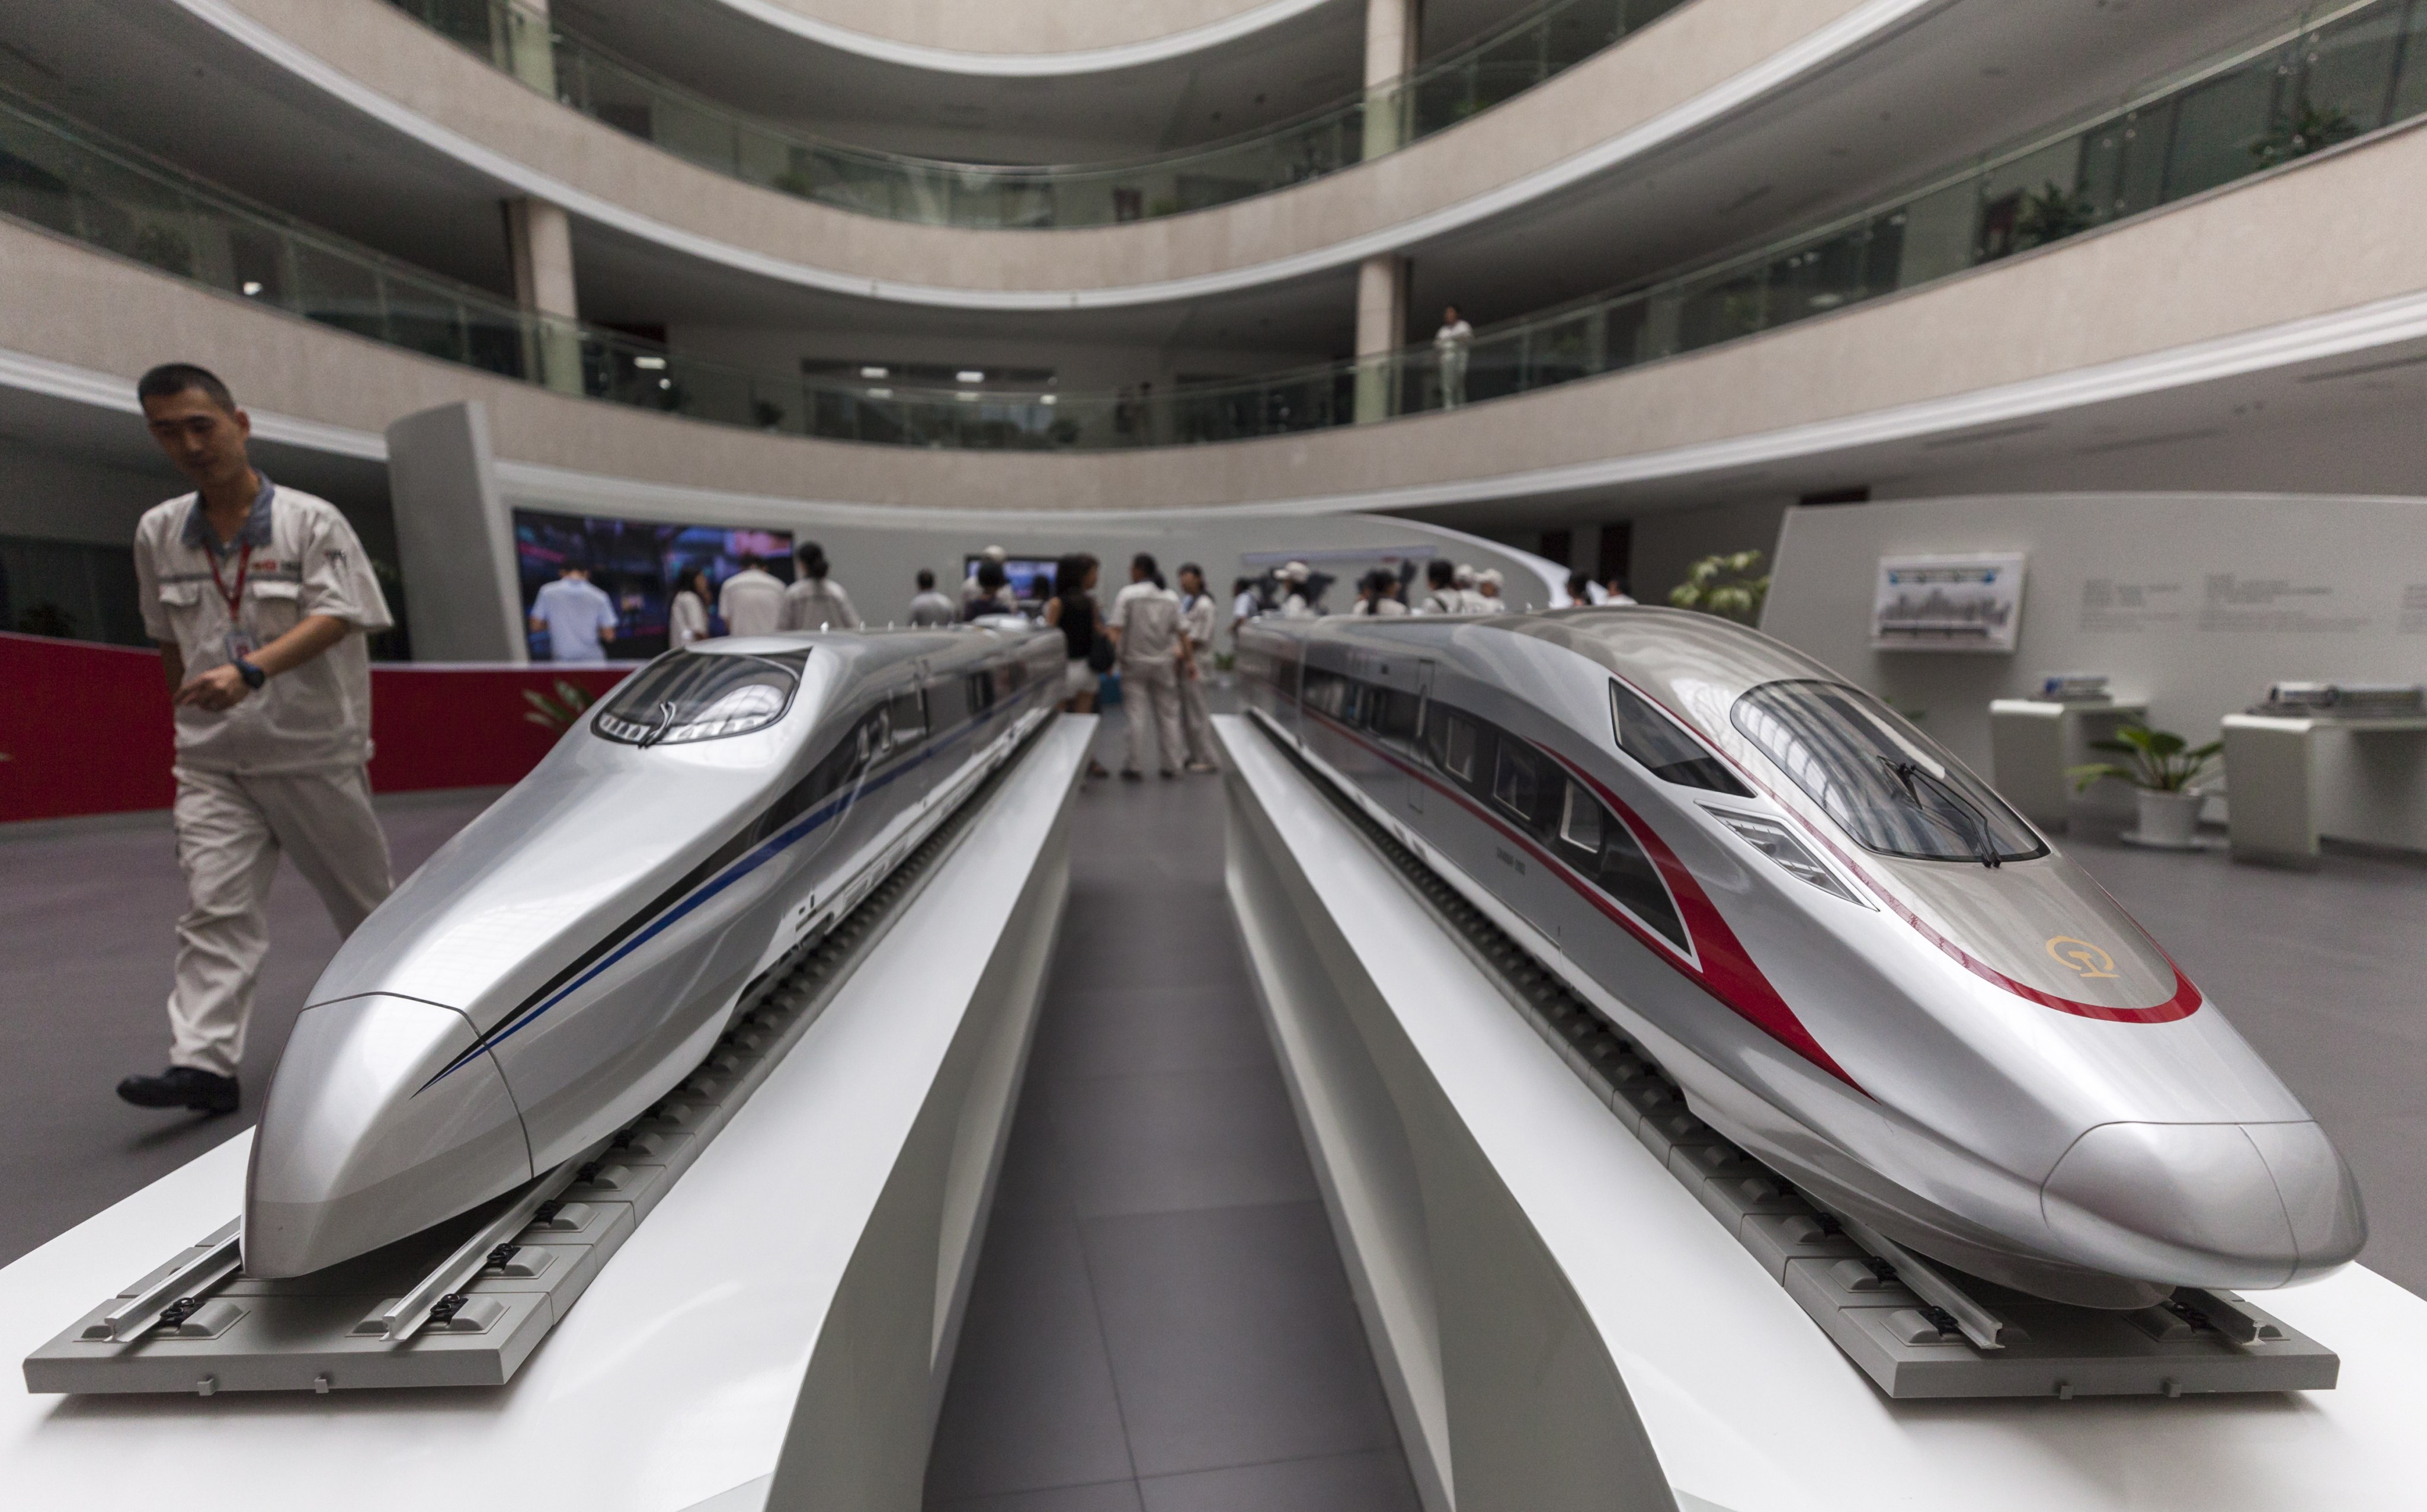 Chinese train maker CRRC Qingdao Sifang, whose models are pictured here, has come under scrutiny in a European Union subsidy investigation. Photo: EPA-EFE